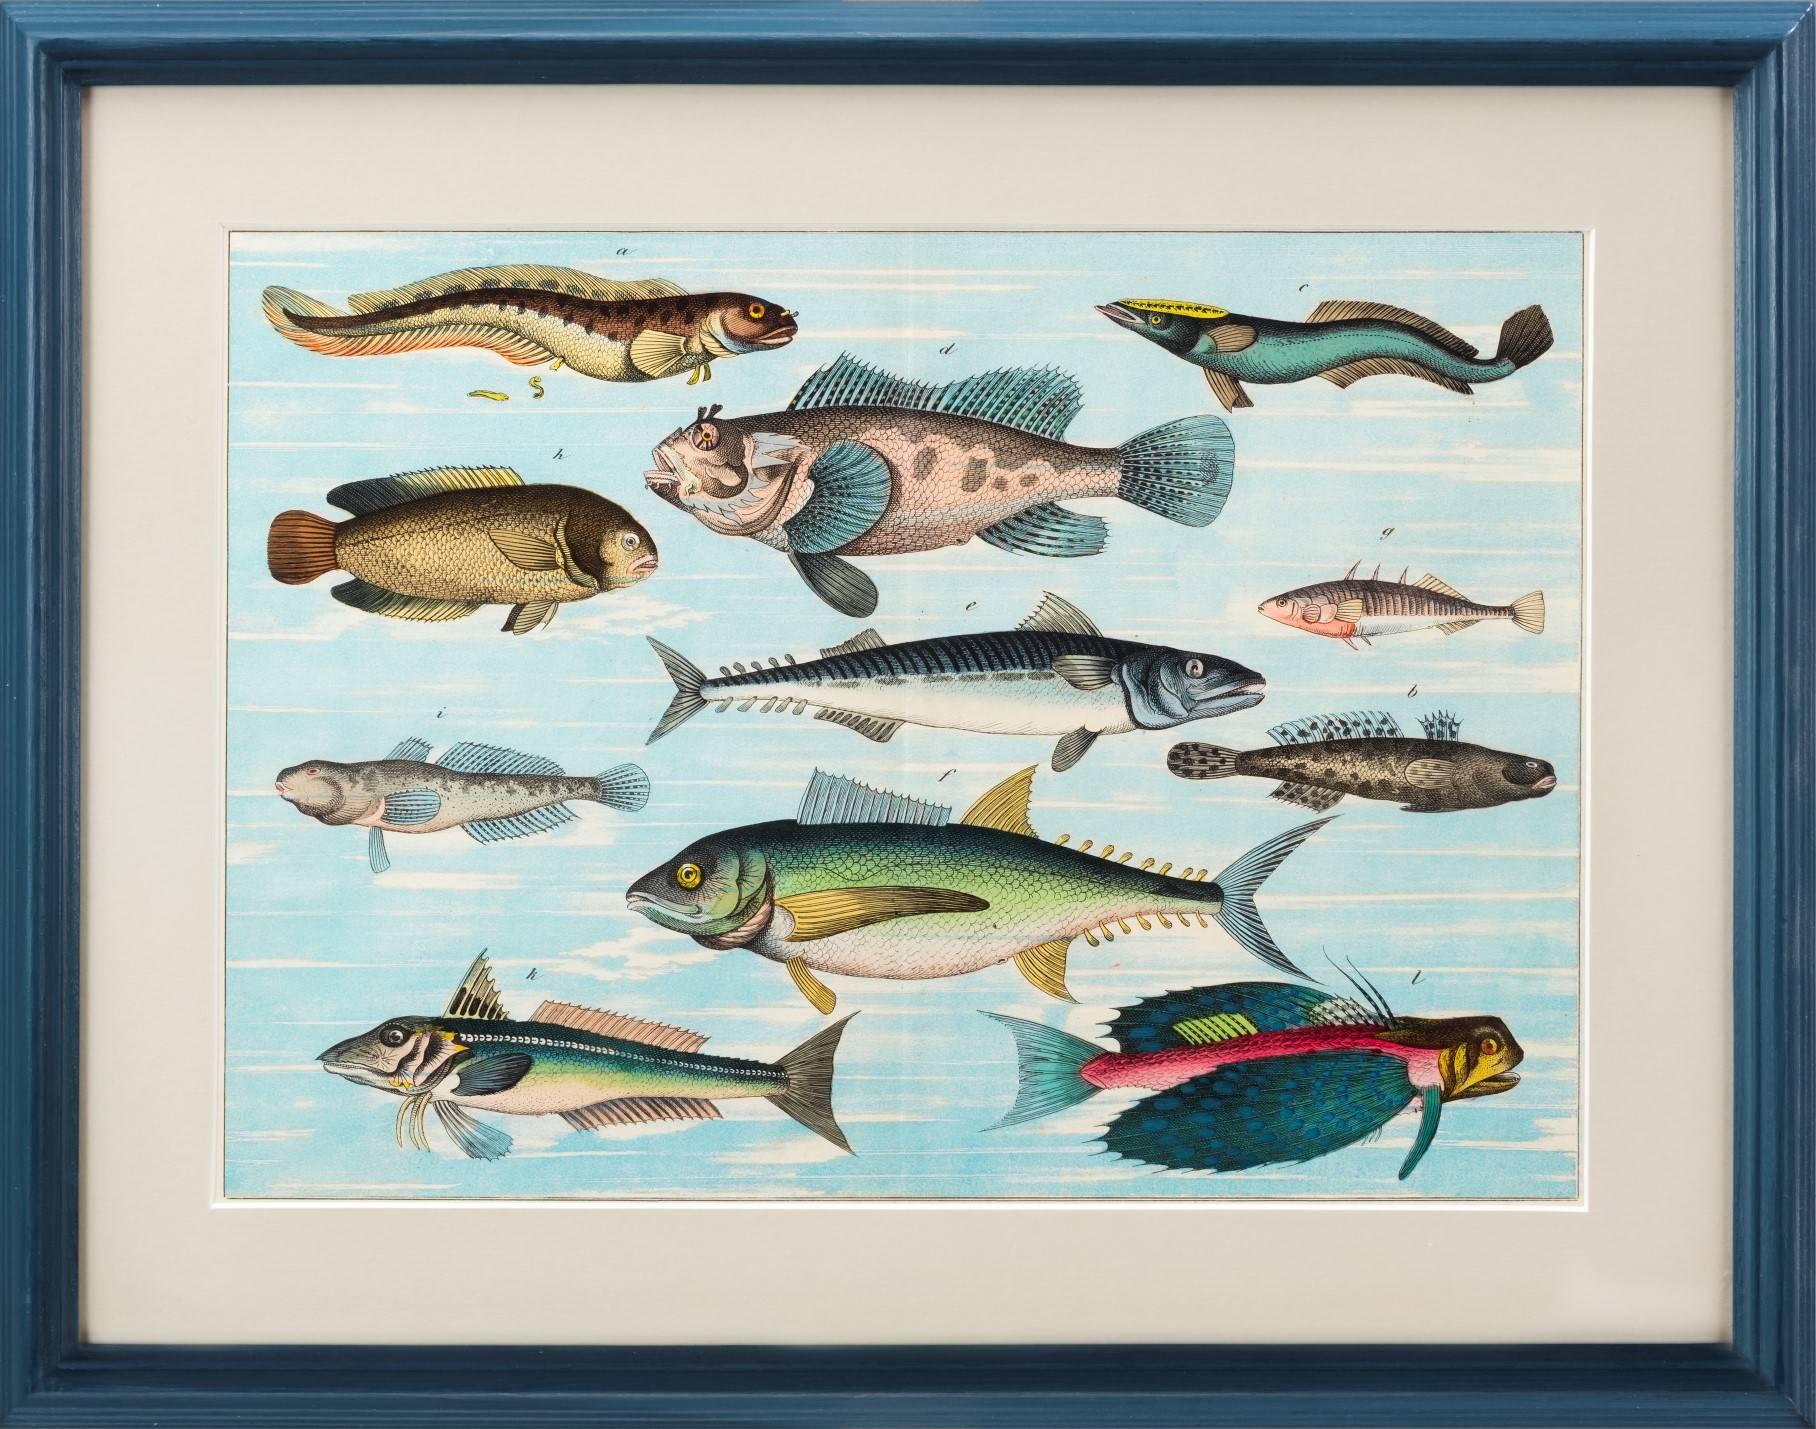 19th Century Tropical Fish Prints For Sale